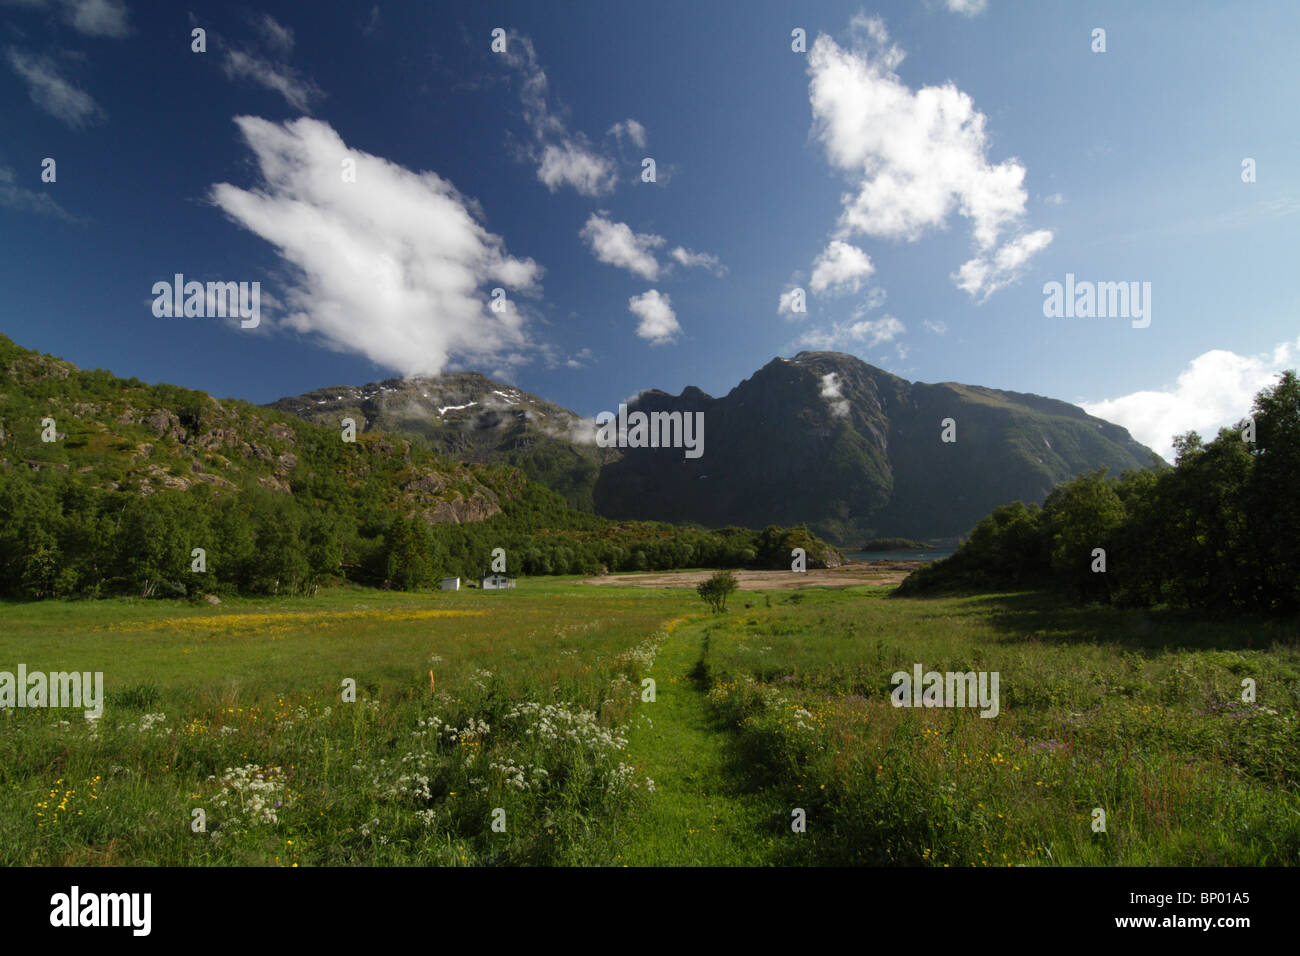 Along Landstrykerstien, a hiking path on Hamaroy, Nordland Fylke, Norway. This place is called Nordland. Stock Photo